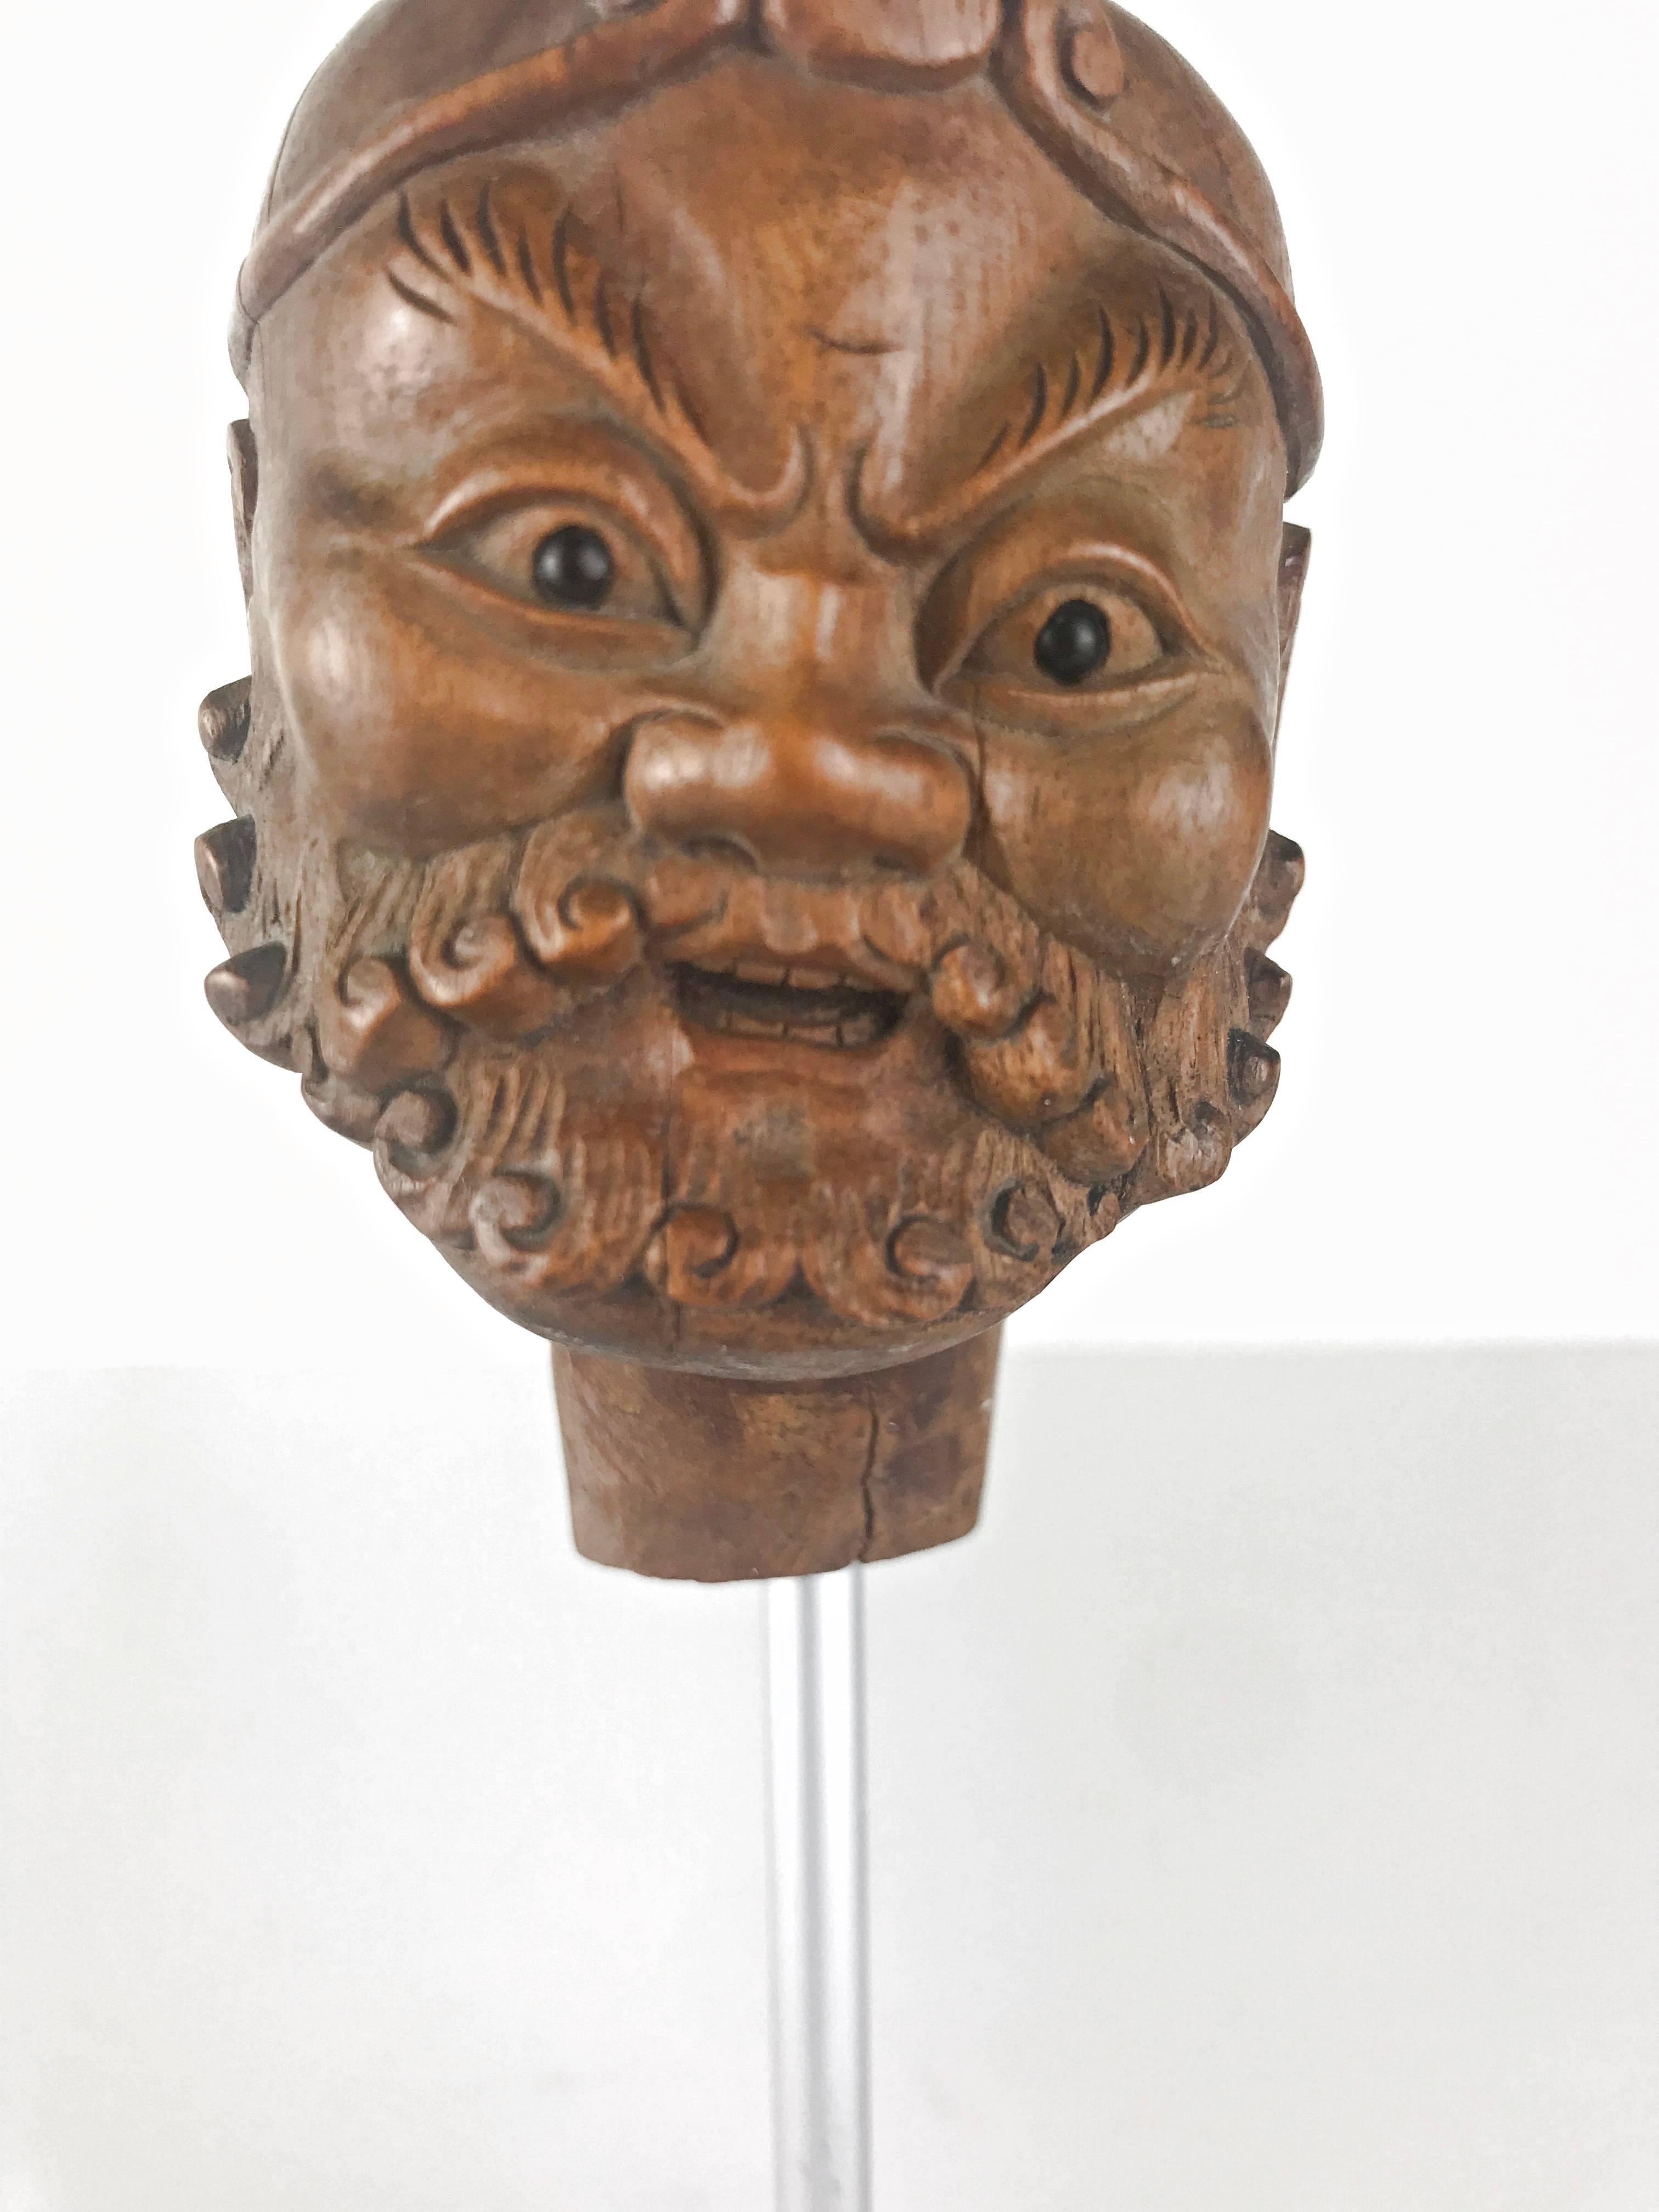 Fine carved Chinese head from a puppet in the form of a Buddhist arhatt, mounted on a wooden base, 19th century.
Size with base is 7.5 inch (19 cm) high.